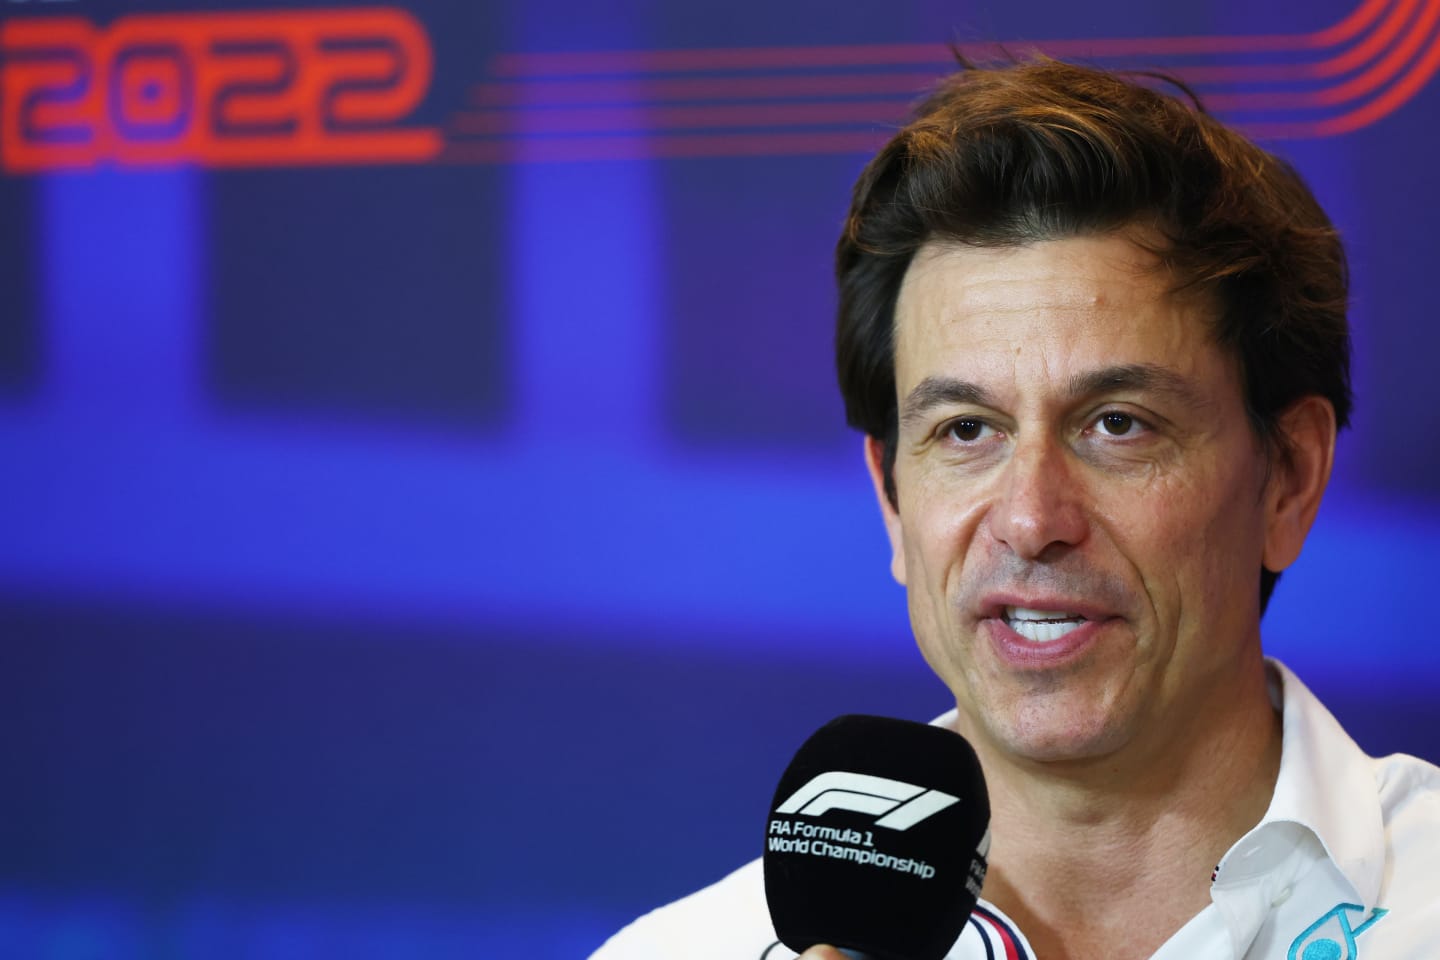 ABU DHABI, UNITED ARAB EMIRATES - NOVEMBER 19: Mercedes GP Executive Director Toto Wolff talks in a press conference during final practice ahead of the F1 Grand Prix of Abu Dhabi at Yas Marina Circuit on November 19, 2022 in Abu Dhabi, United Arab Emirates. (Photo by Bryn Lennon/Getty Images)